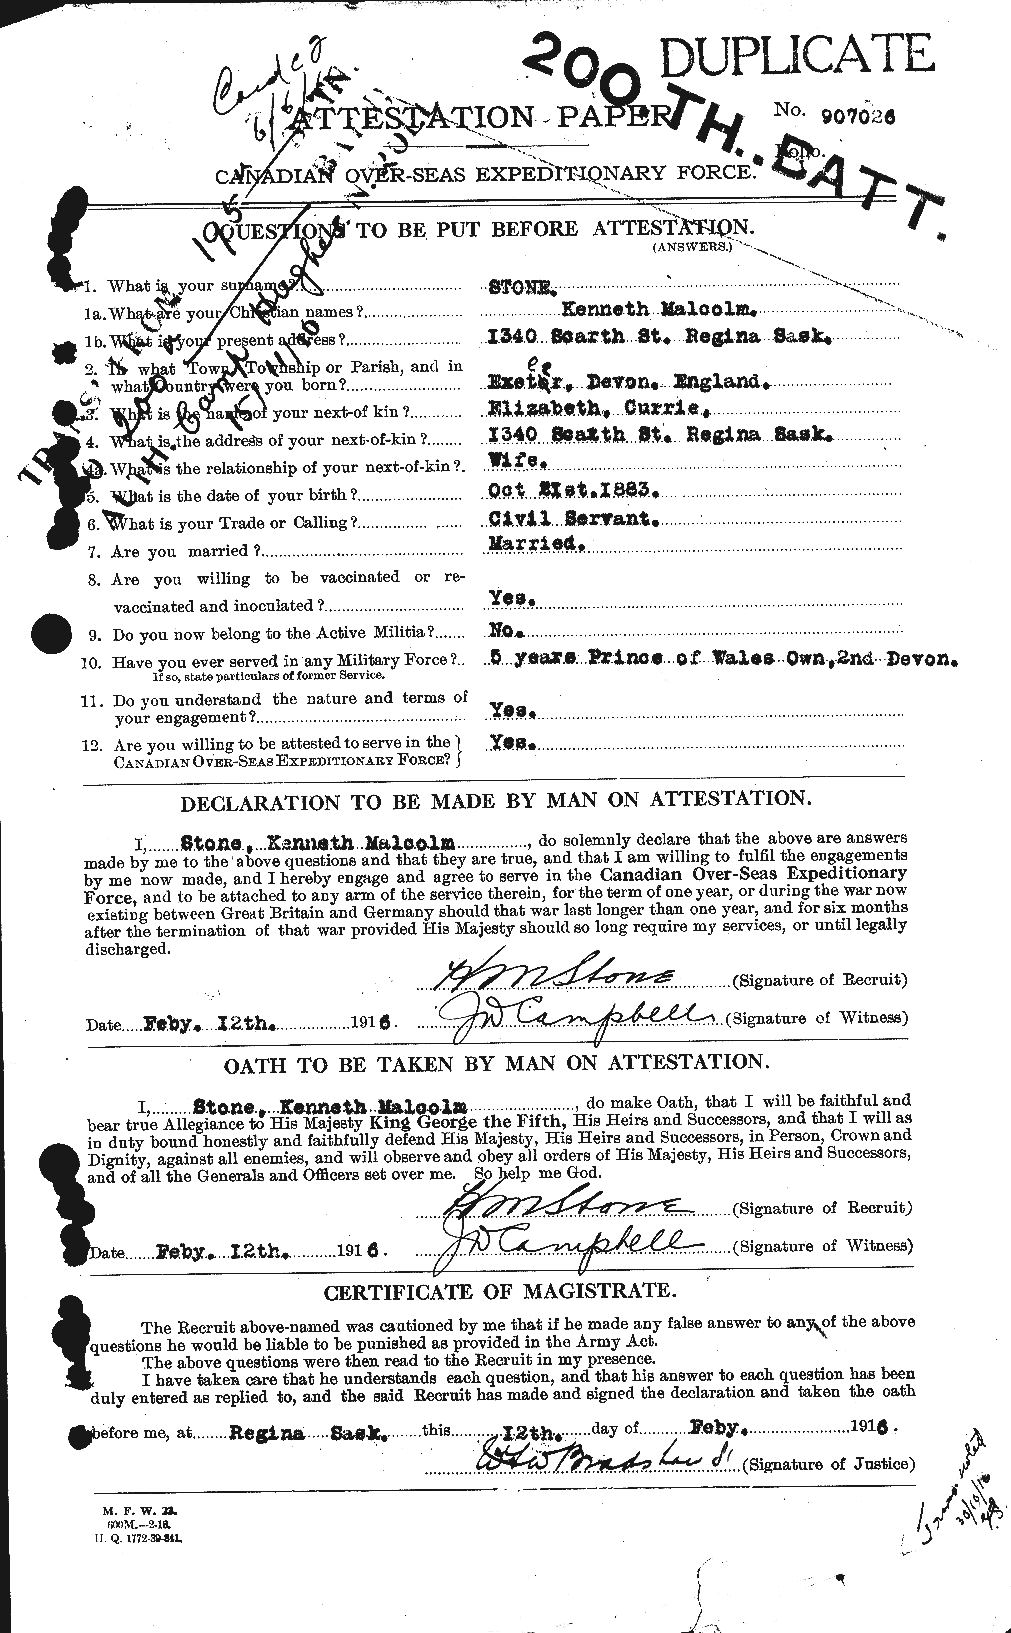 Personnel Records of the First World War - CEF 121920a